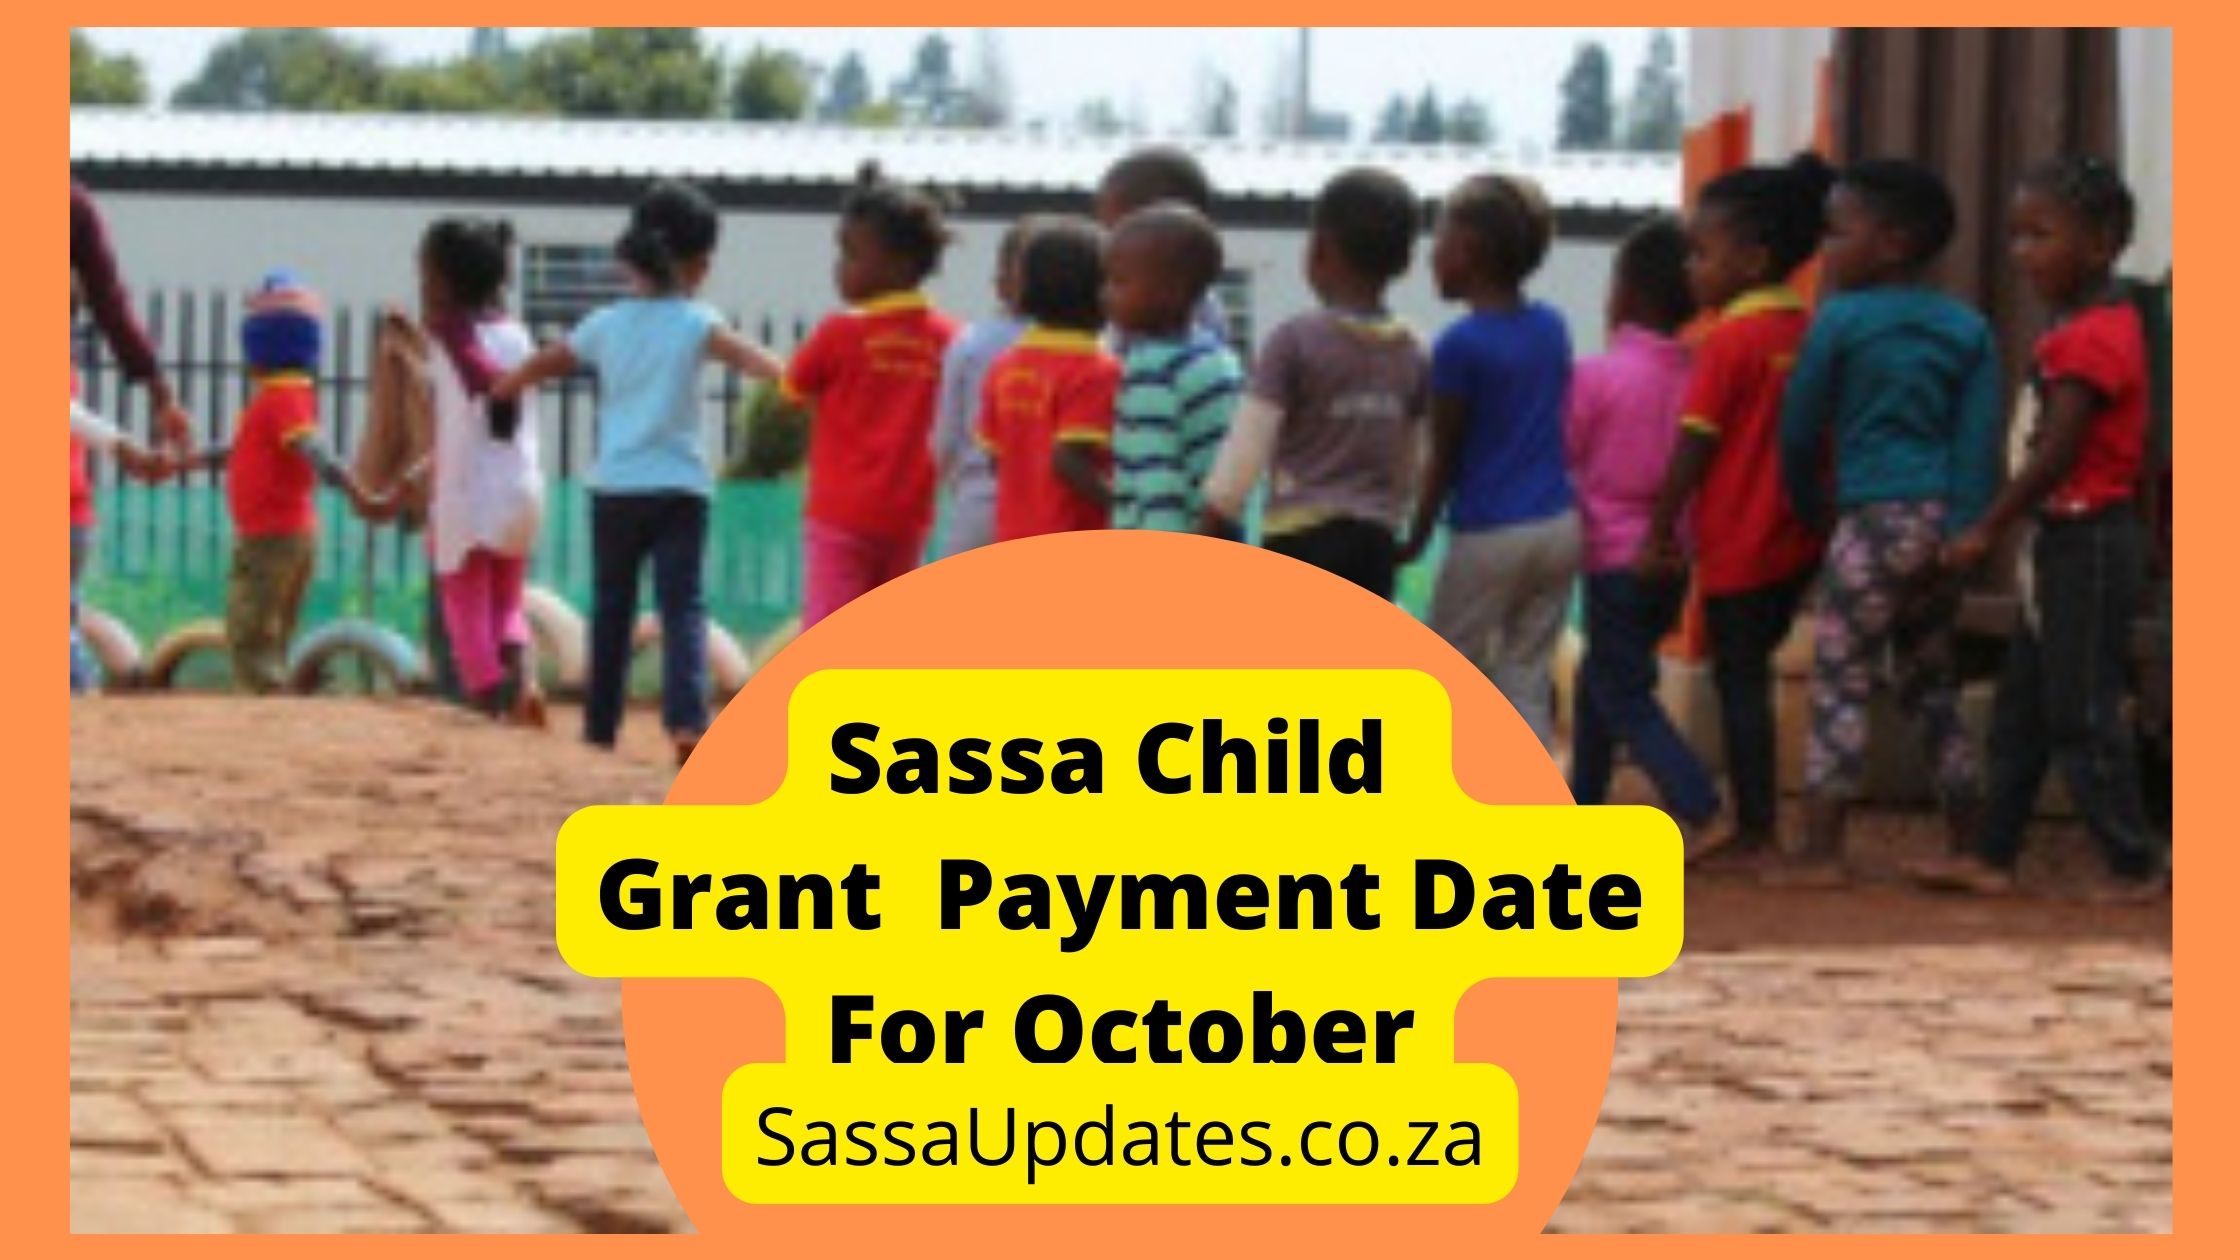 Sassa Child Grant Payment Date for October